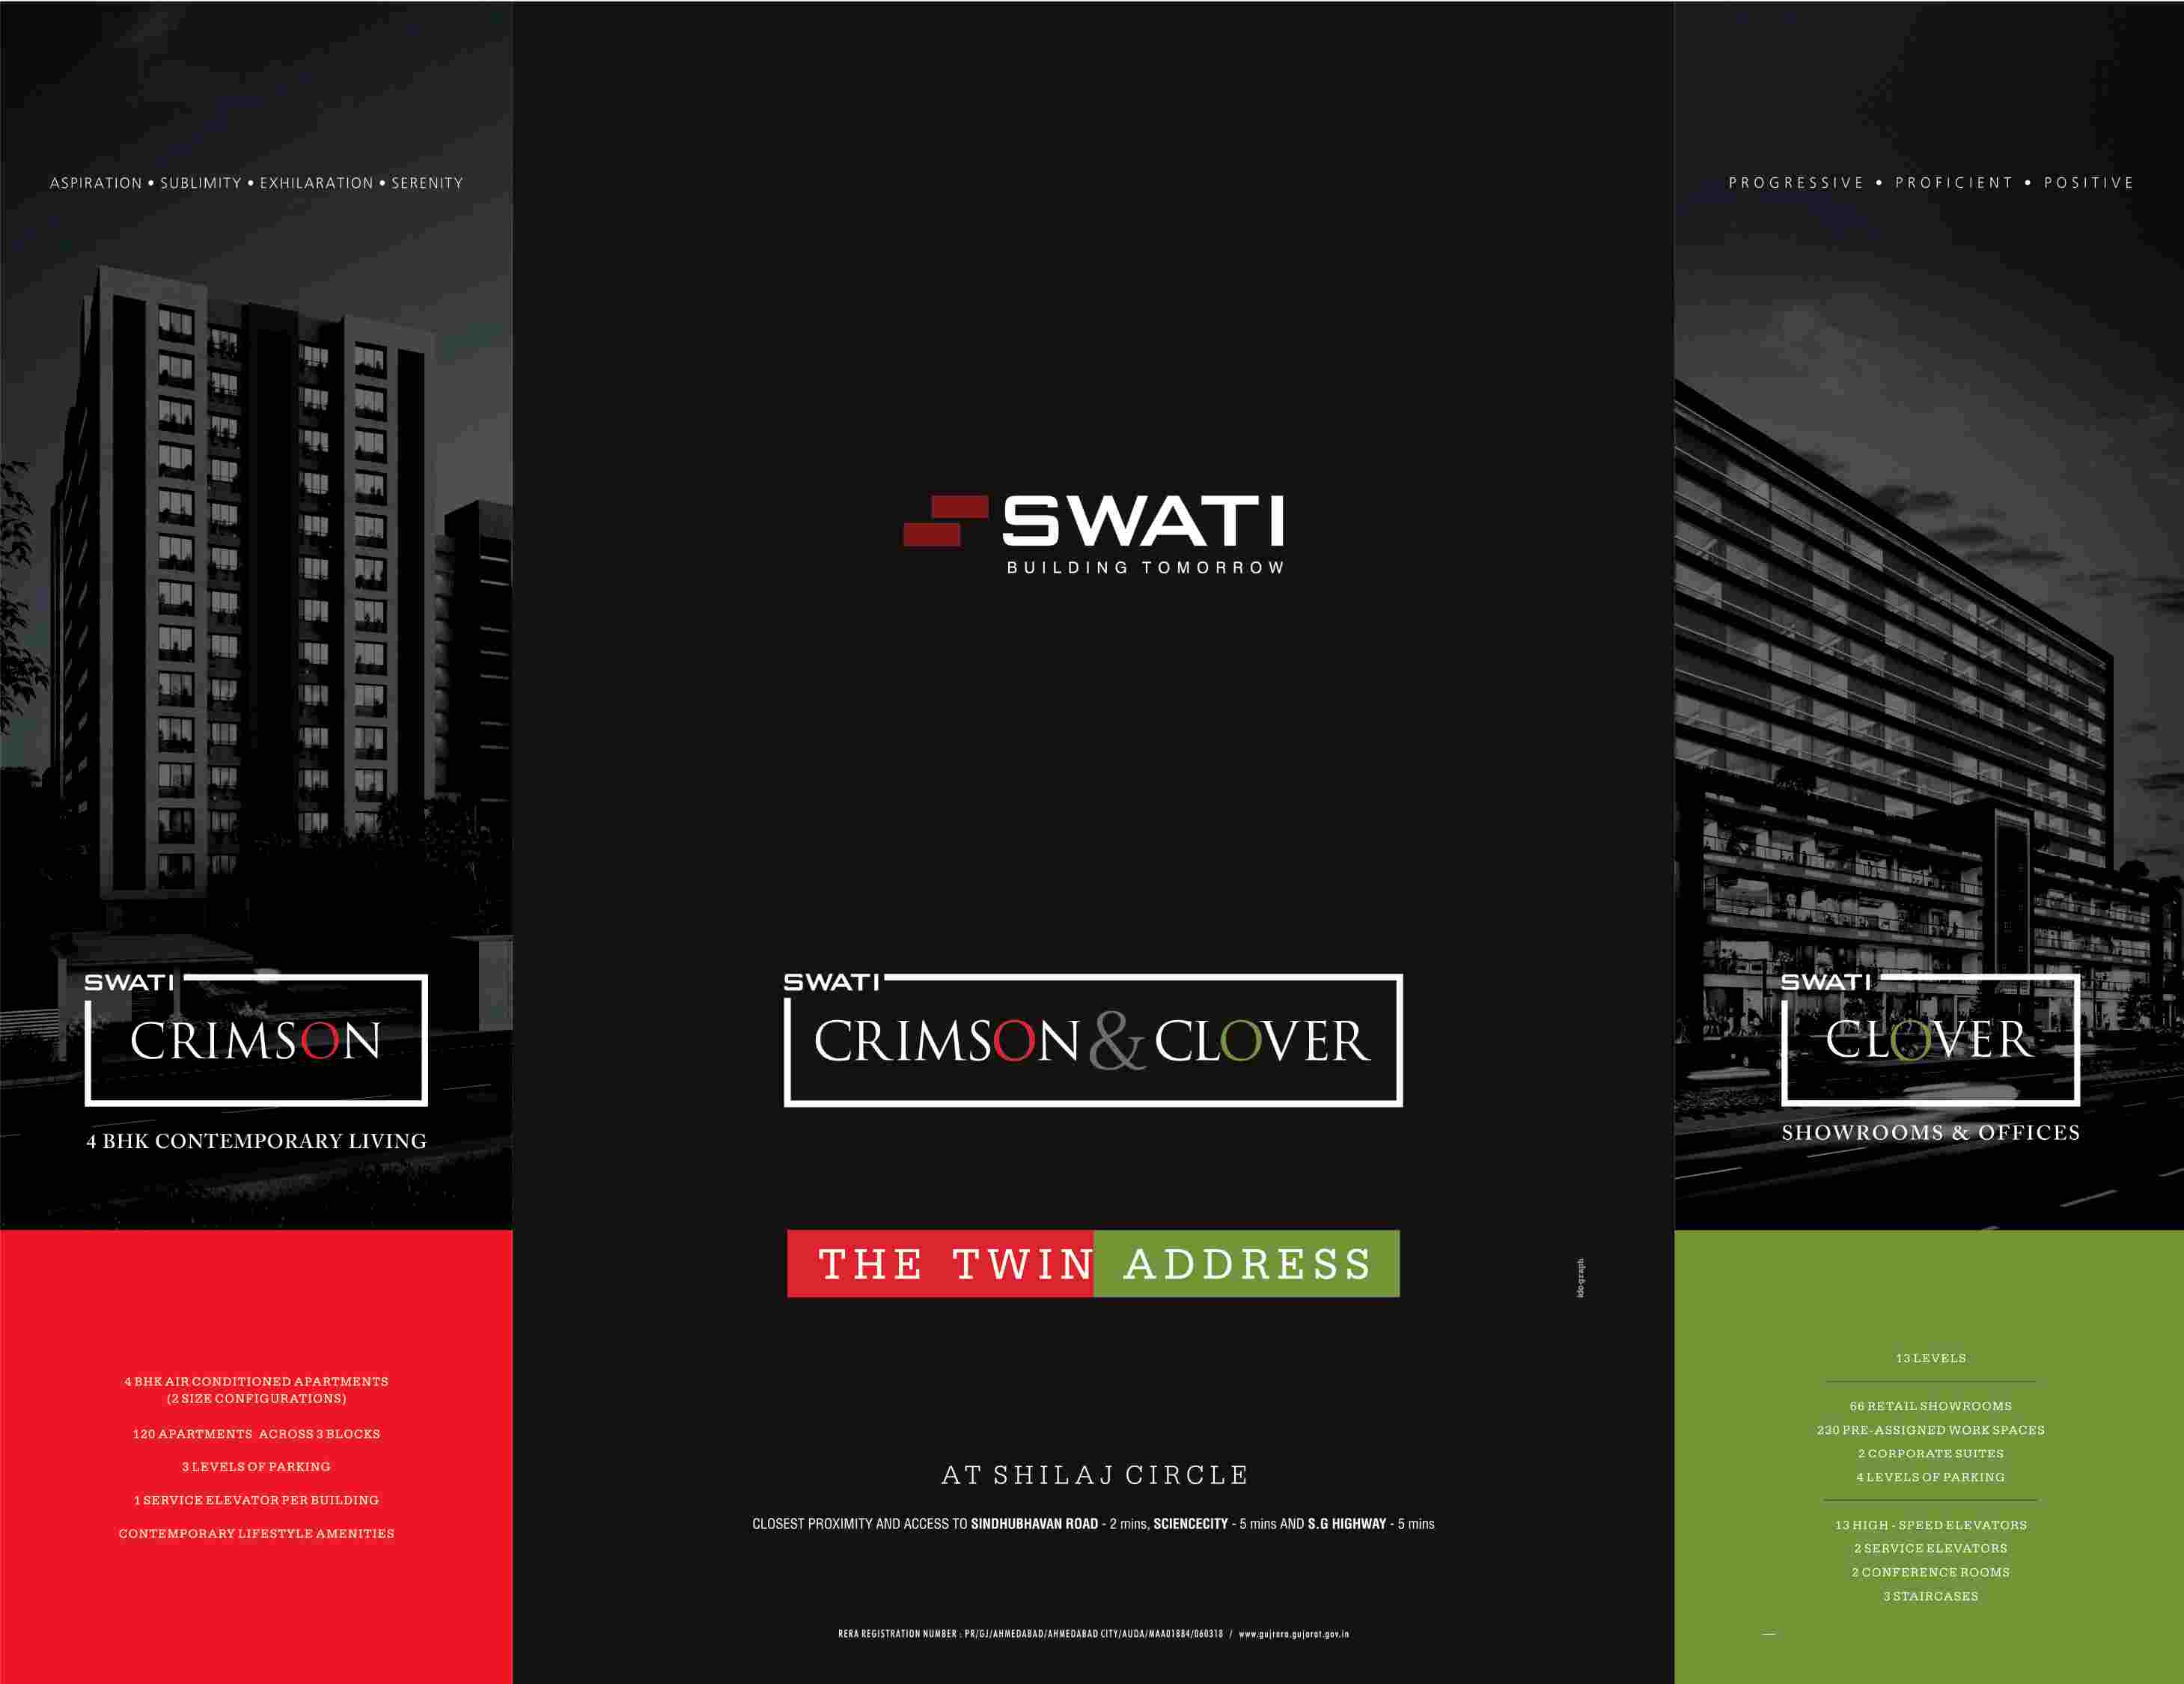 Presenting Crimpson & Clover, the twin address by Swati Procon in Ahmedabad Update